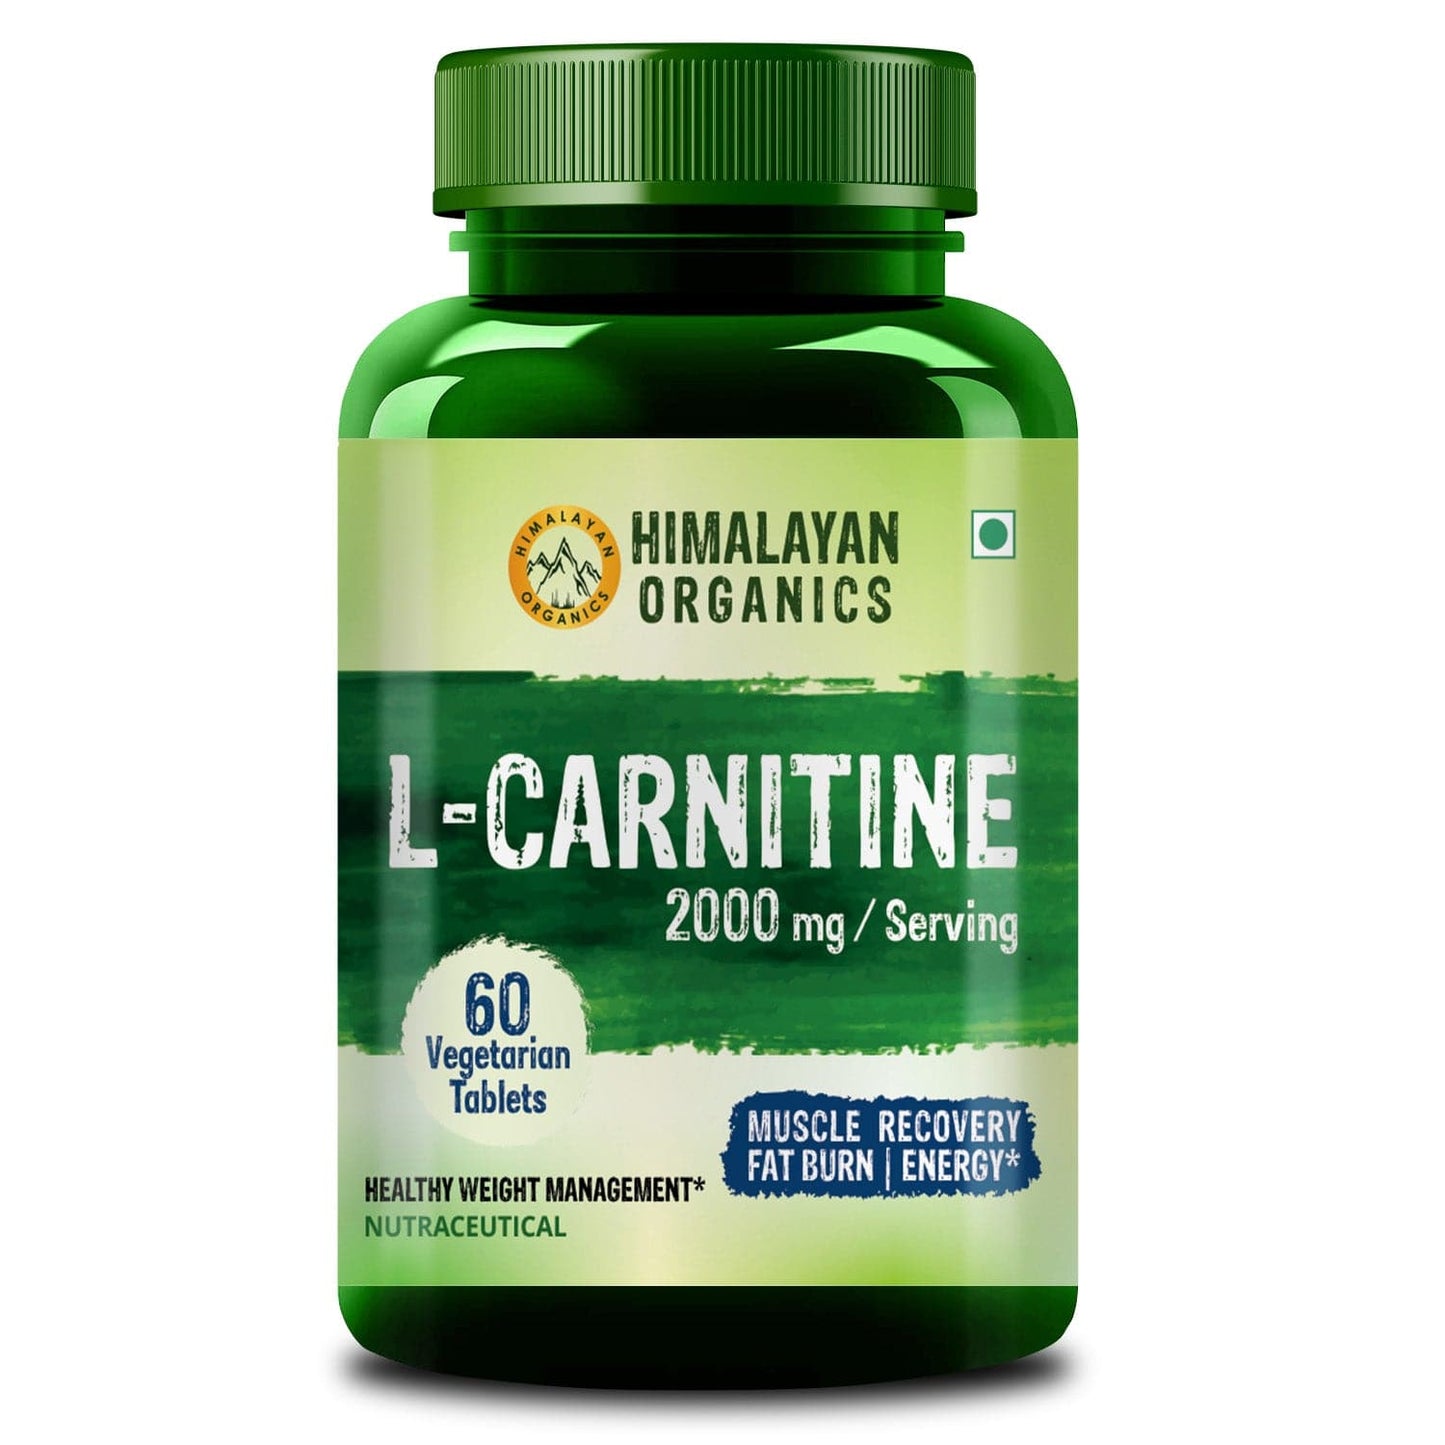 Himalayan Organics L-Carnitine 2000 Mg | Healthy Weight Management | Supports Muscle Recovery, Boost Energy, Endurance, And Fat Burn - 60 Vegetarian Tablets